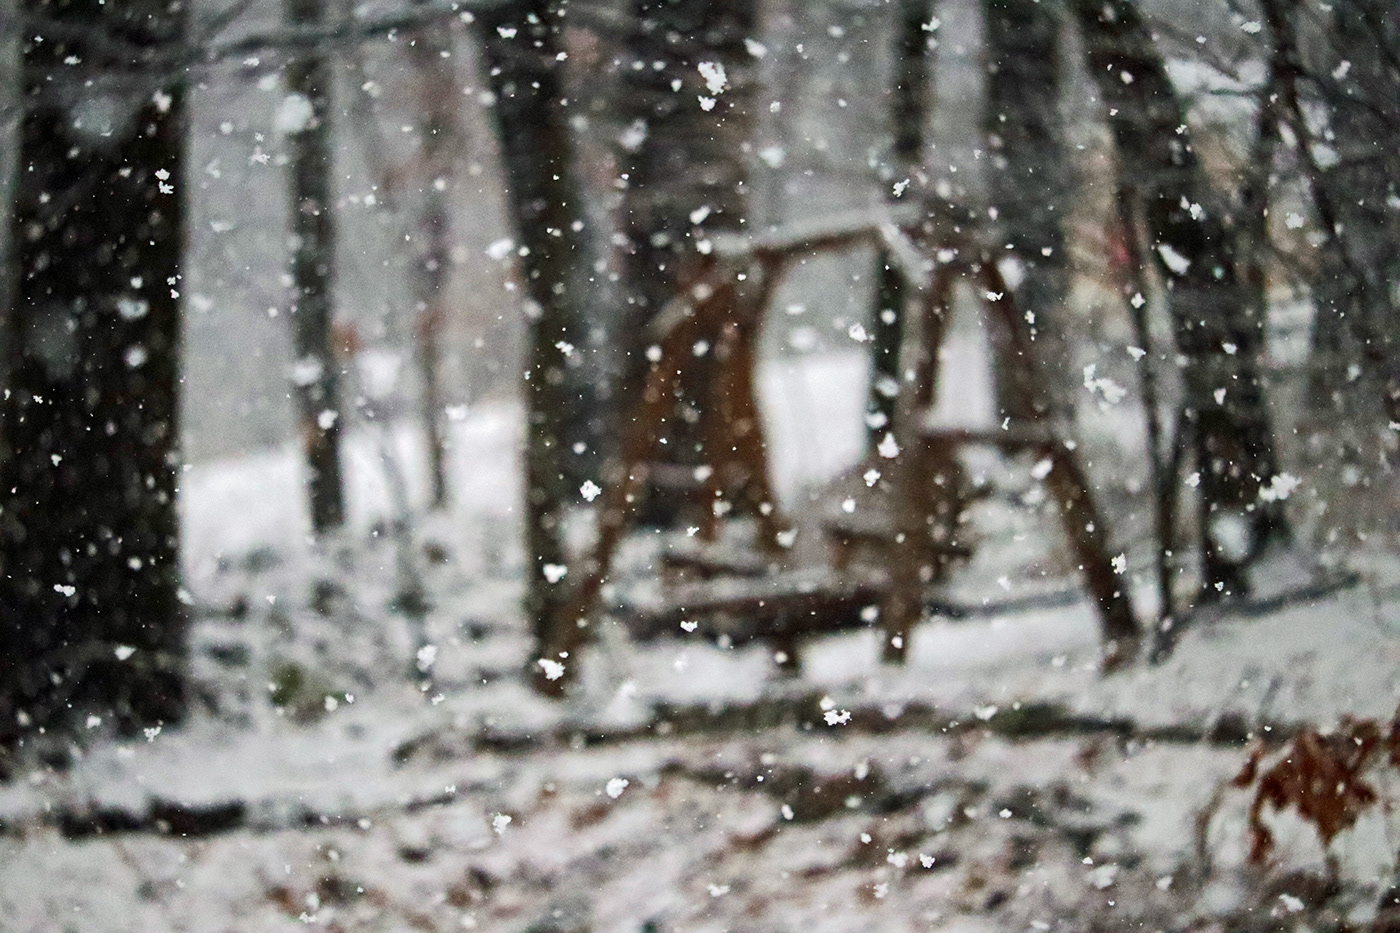 #cinematicsequence #photography #snow #Video   #winterphotography